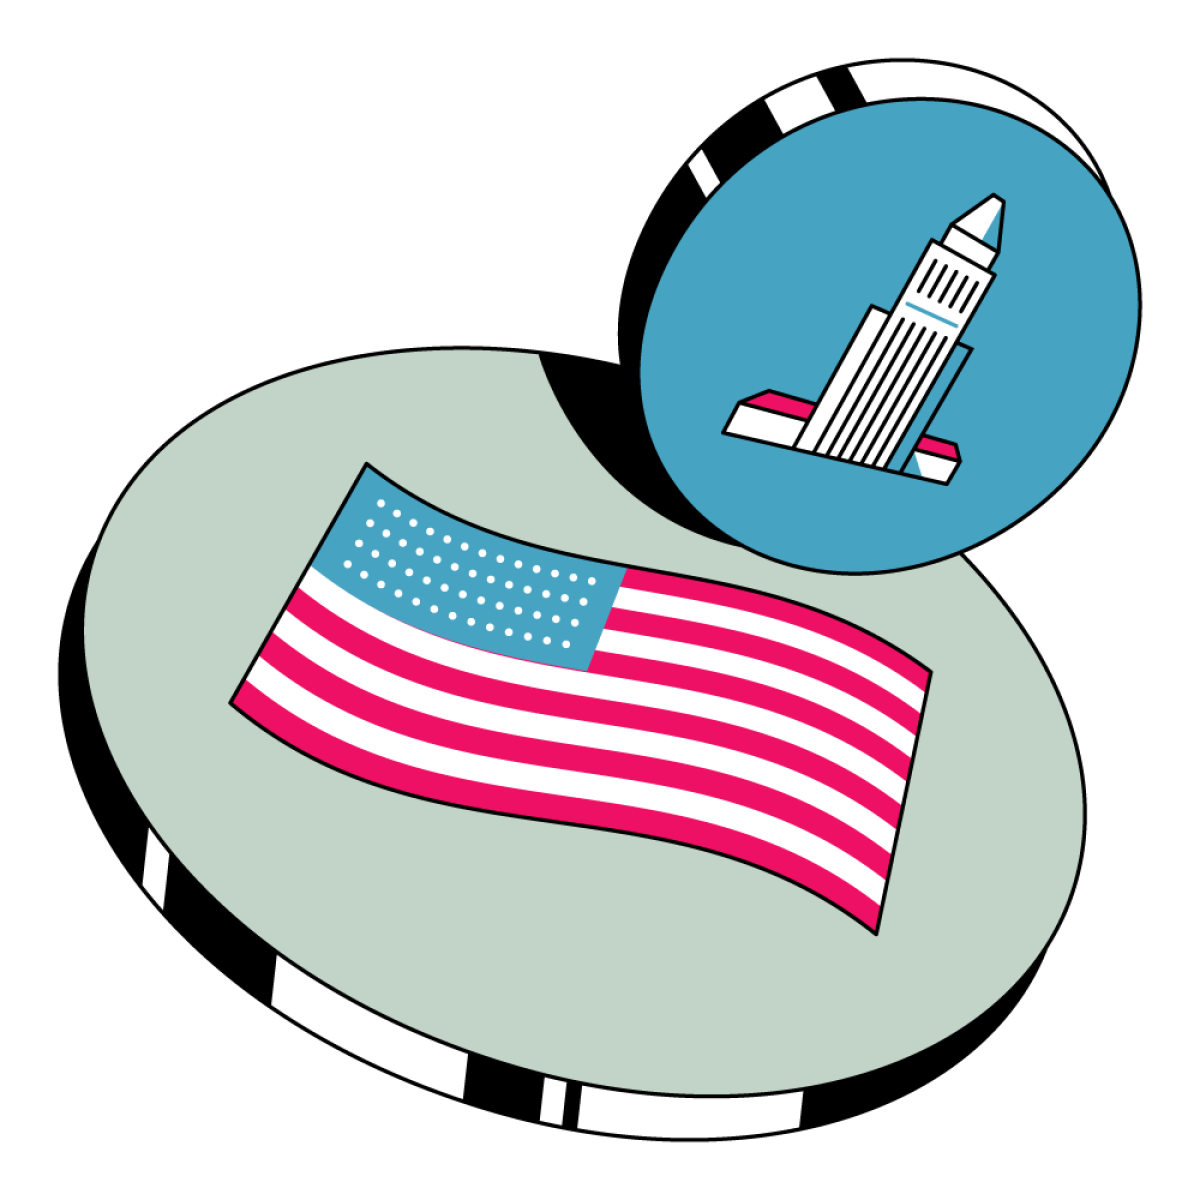 Illustration of American flag and city hall. Jordon Cheung / For The Times